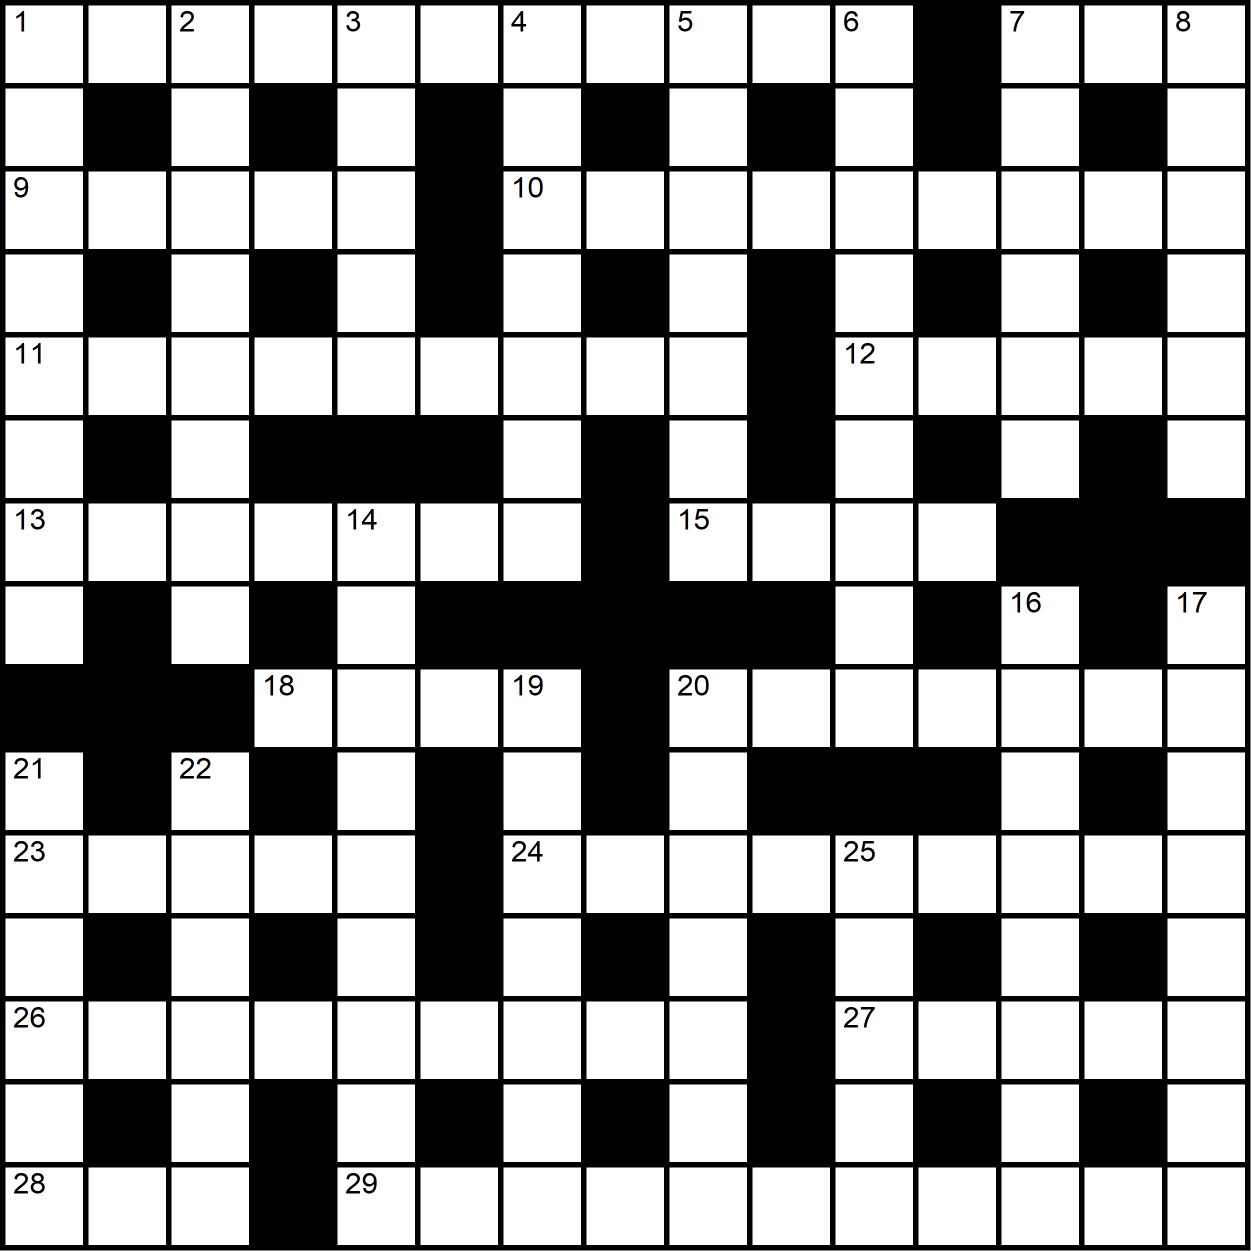 A cryptic crossword grid with long acrosses at the top and bottom and three black cross shapes in the middle.